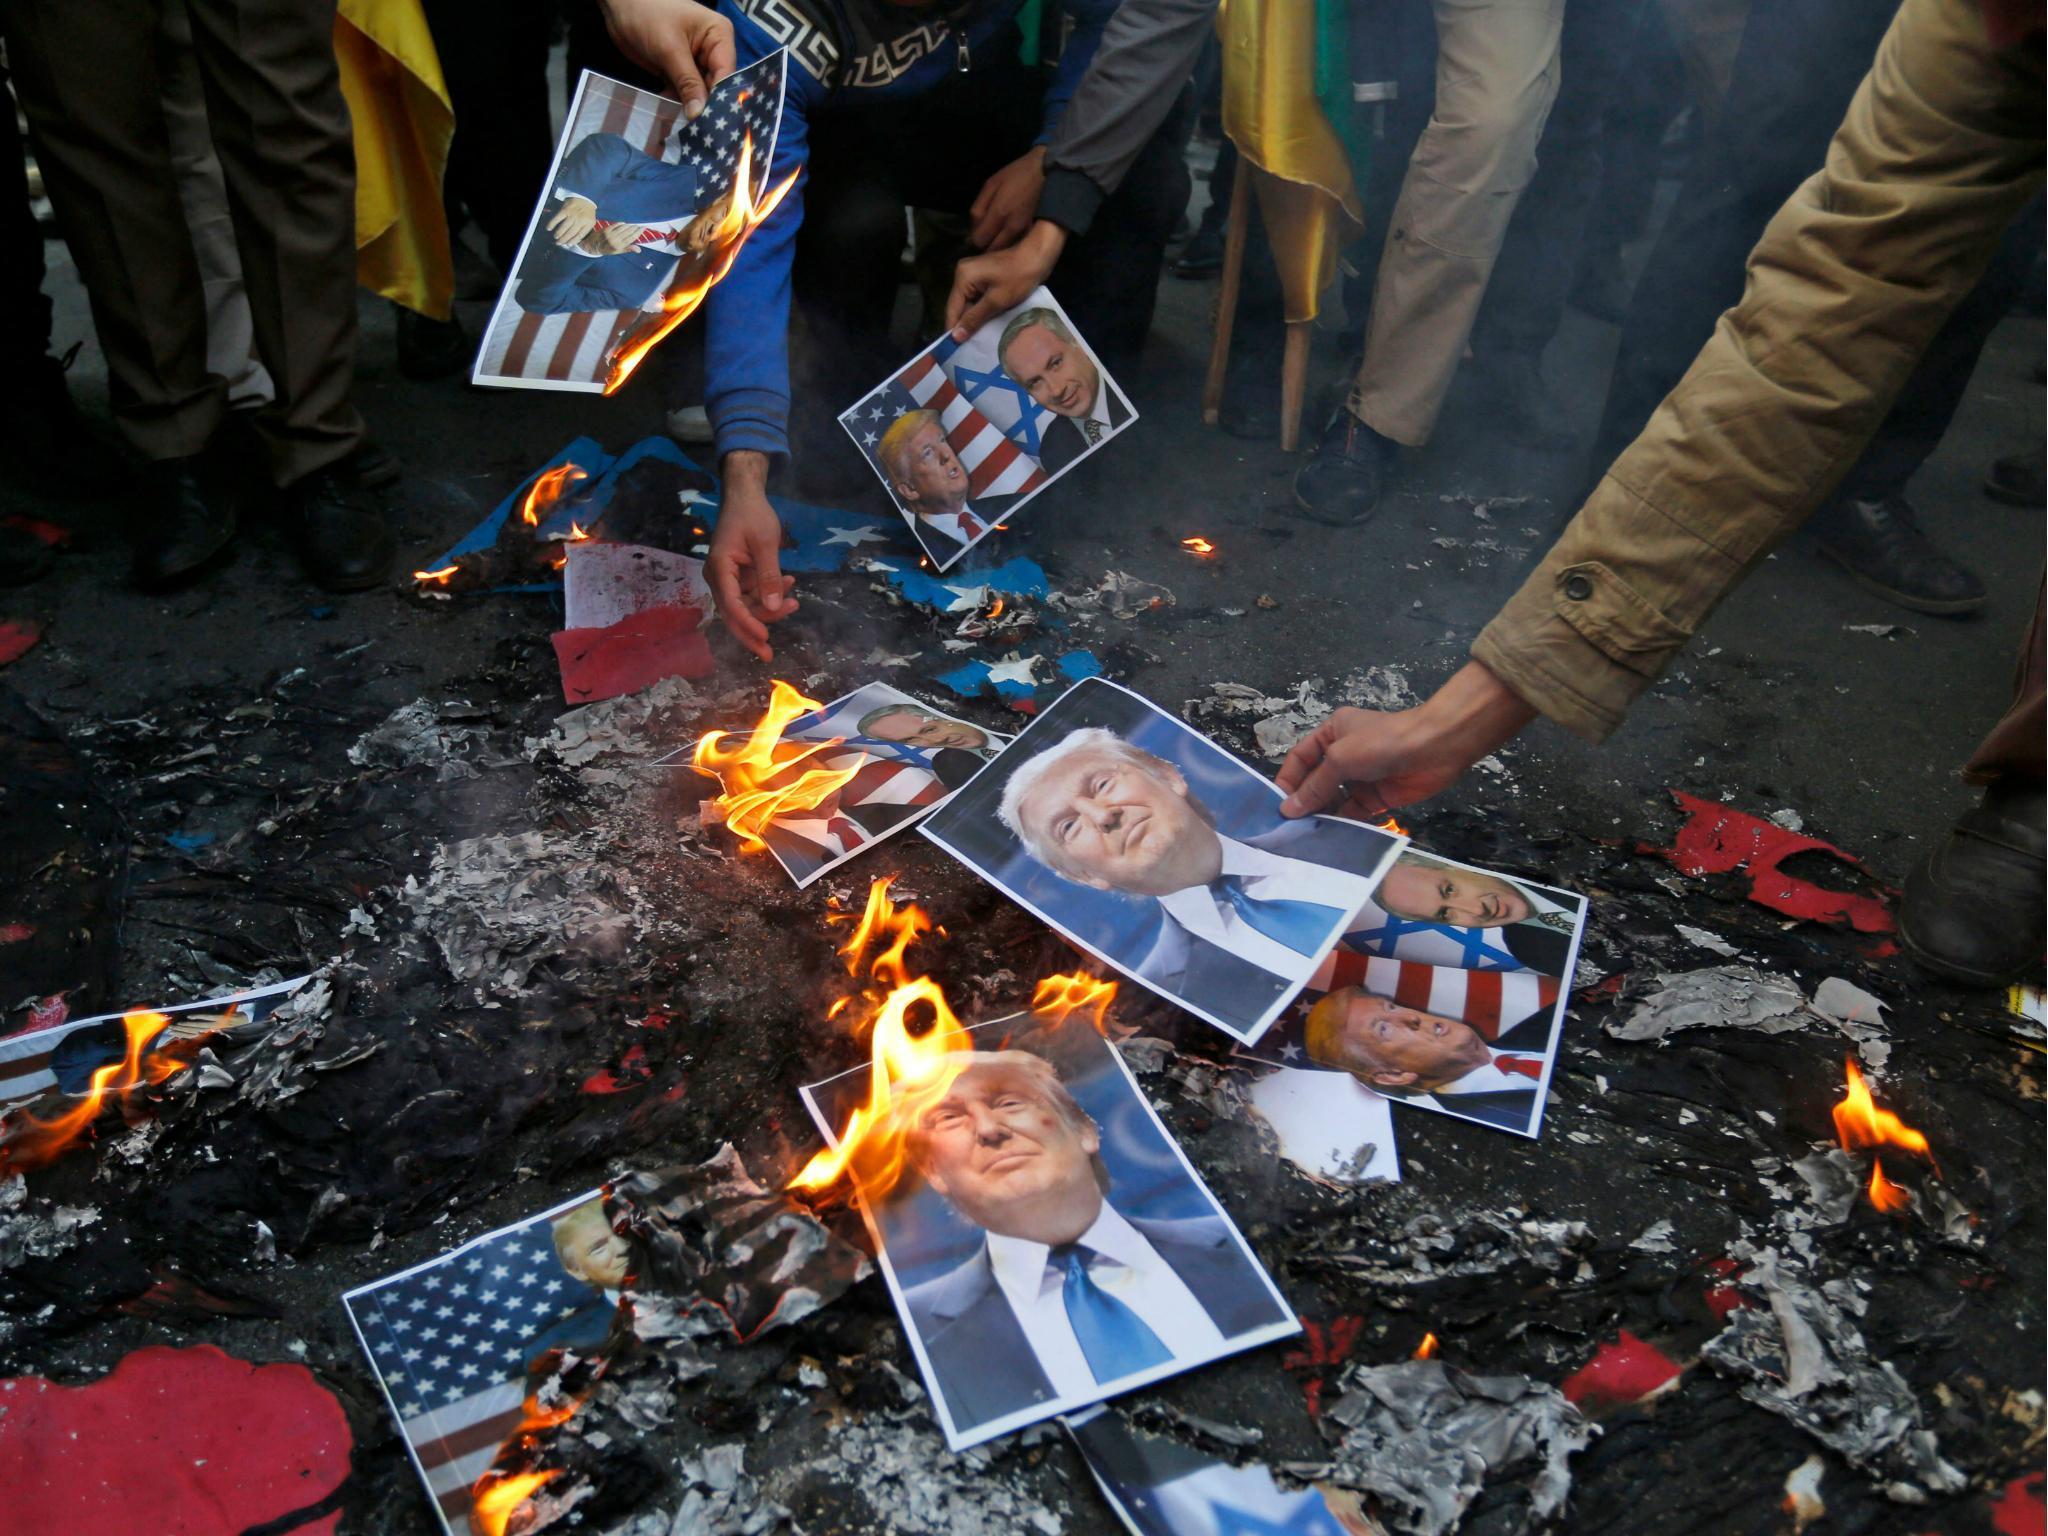 Portraits of the US President were burned during a demonstration in Tehran on 11 December